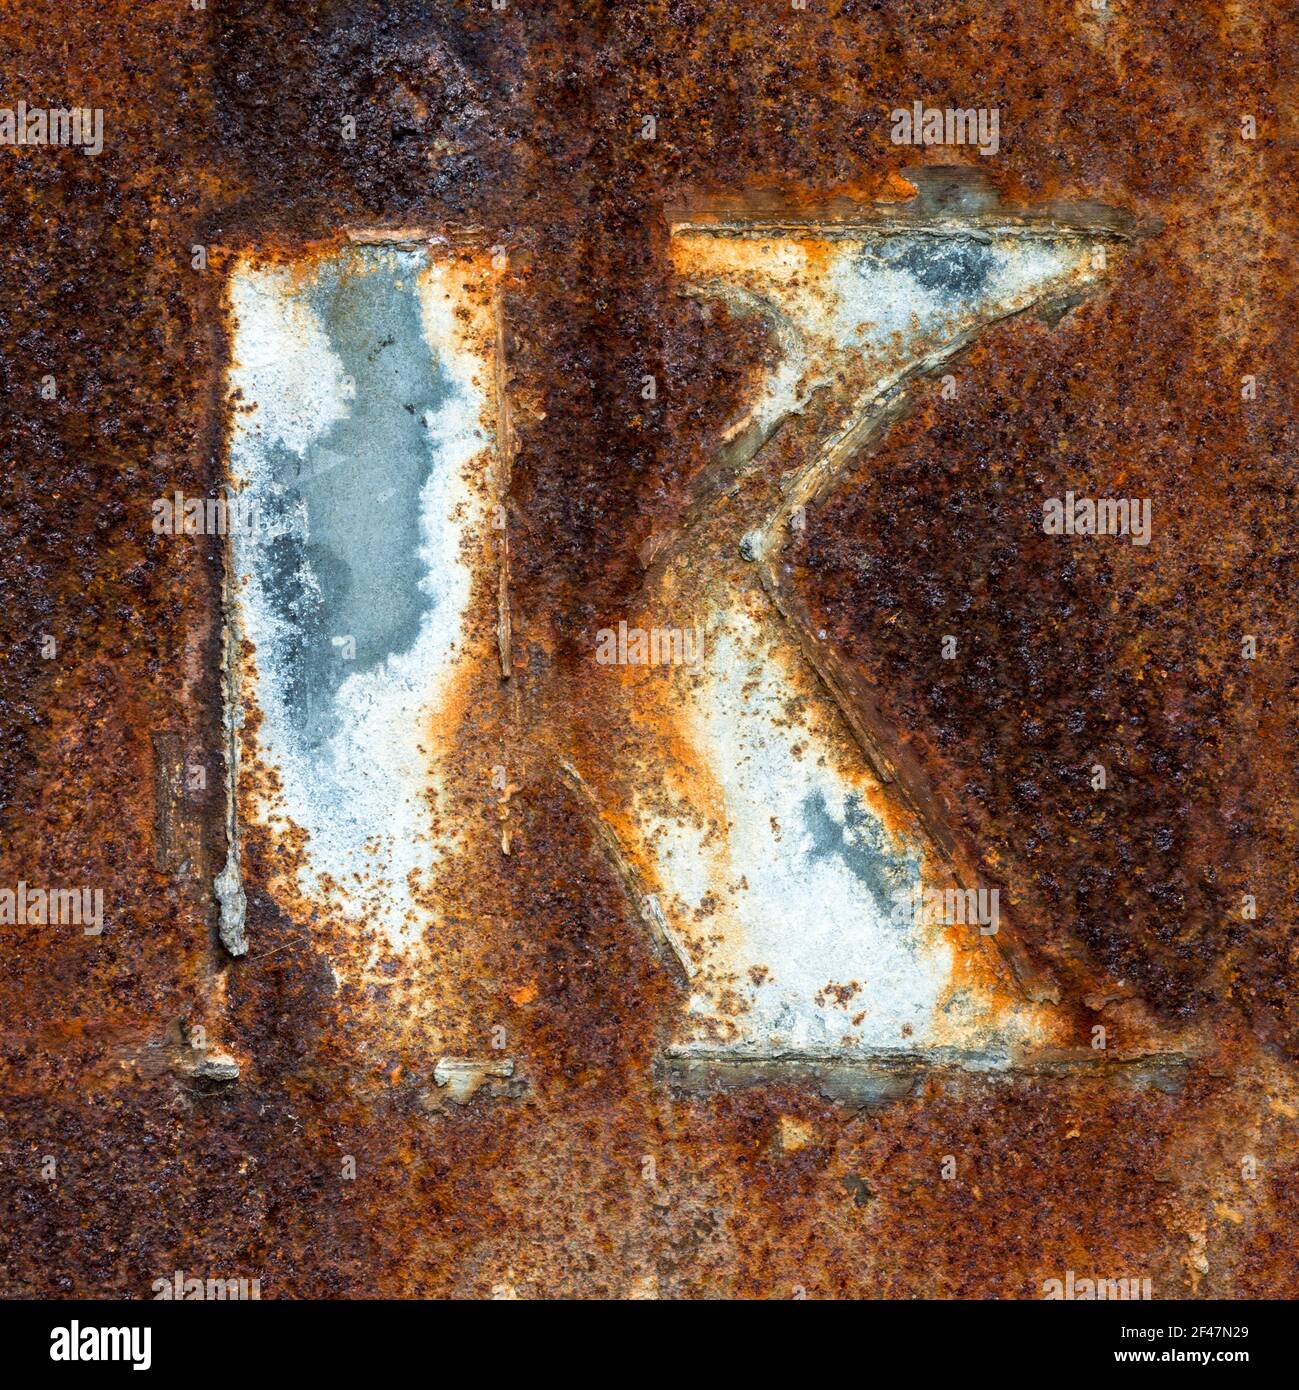 Remains of the letter K on rusty metal plate Stock Photo